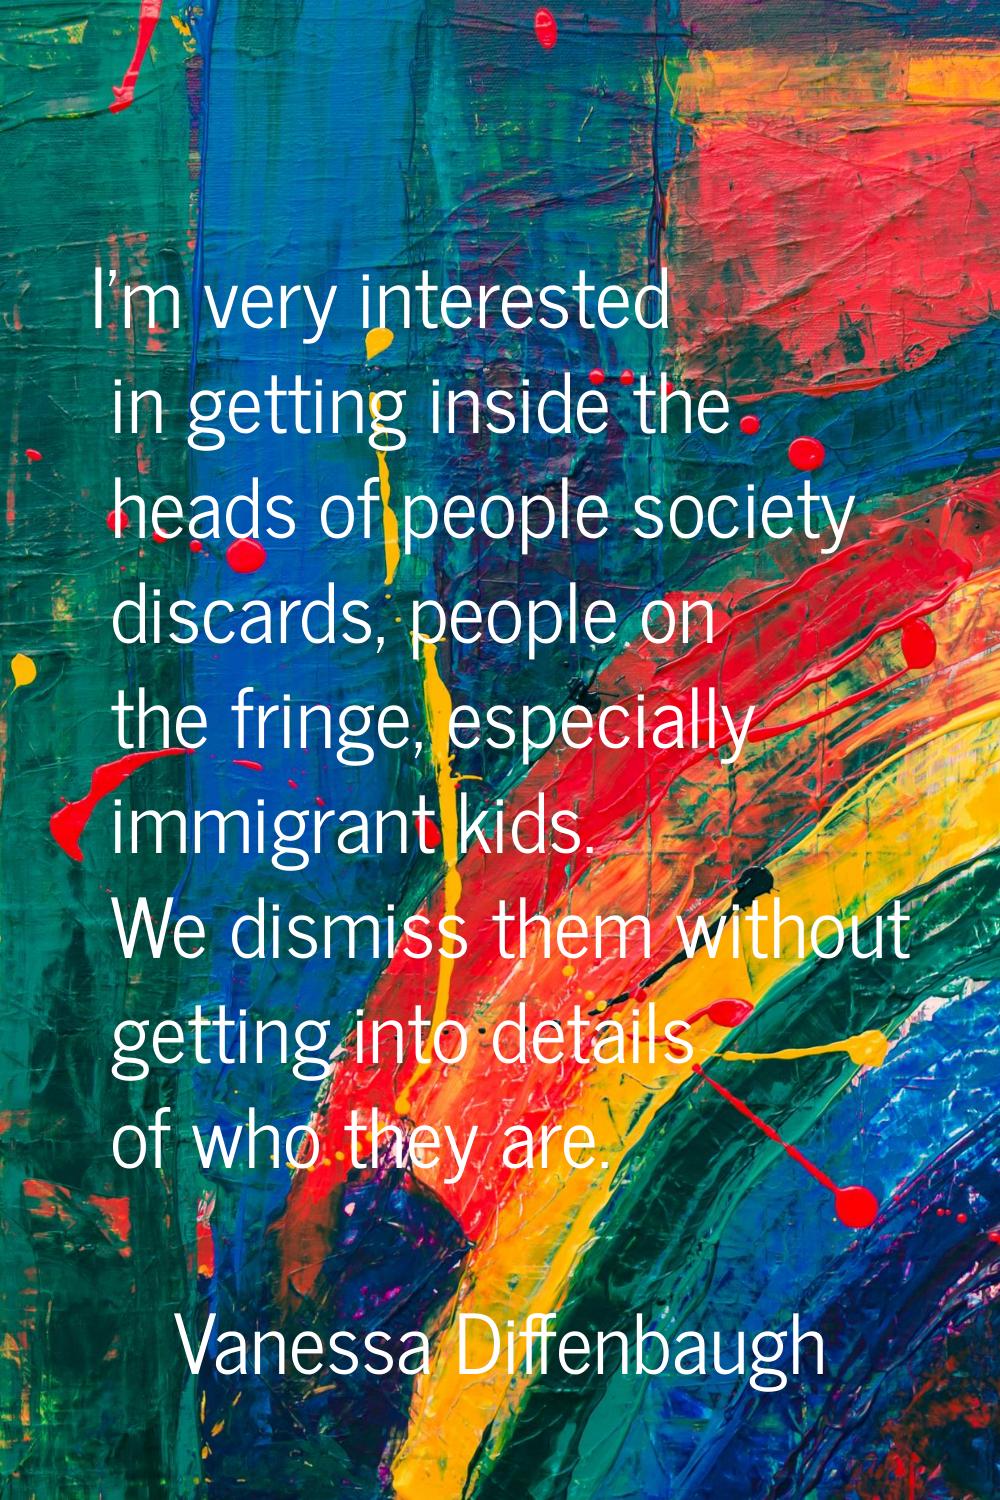 I'm very interested in getting inside the heads of people society discards, people on the fringe, e